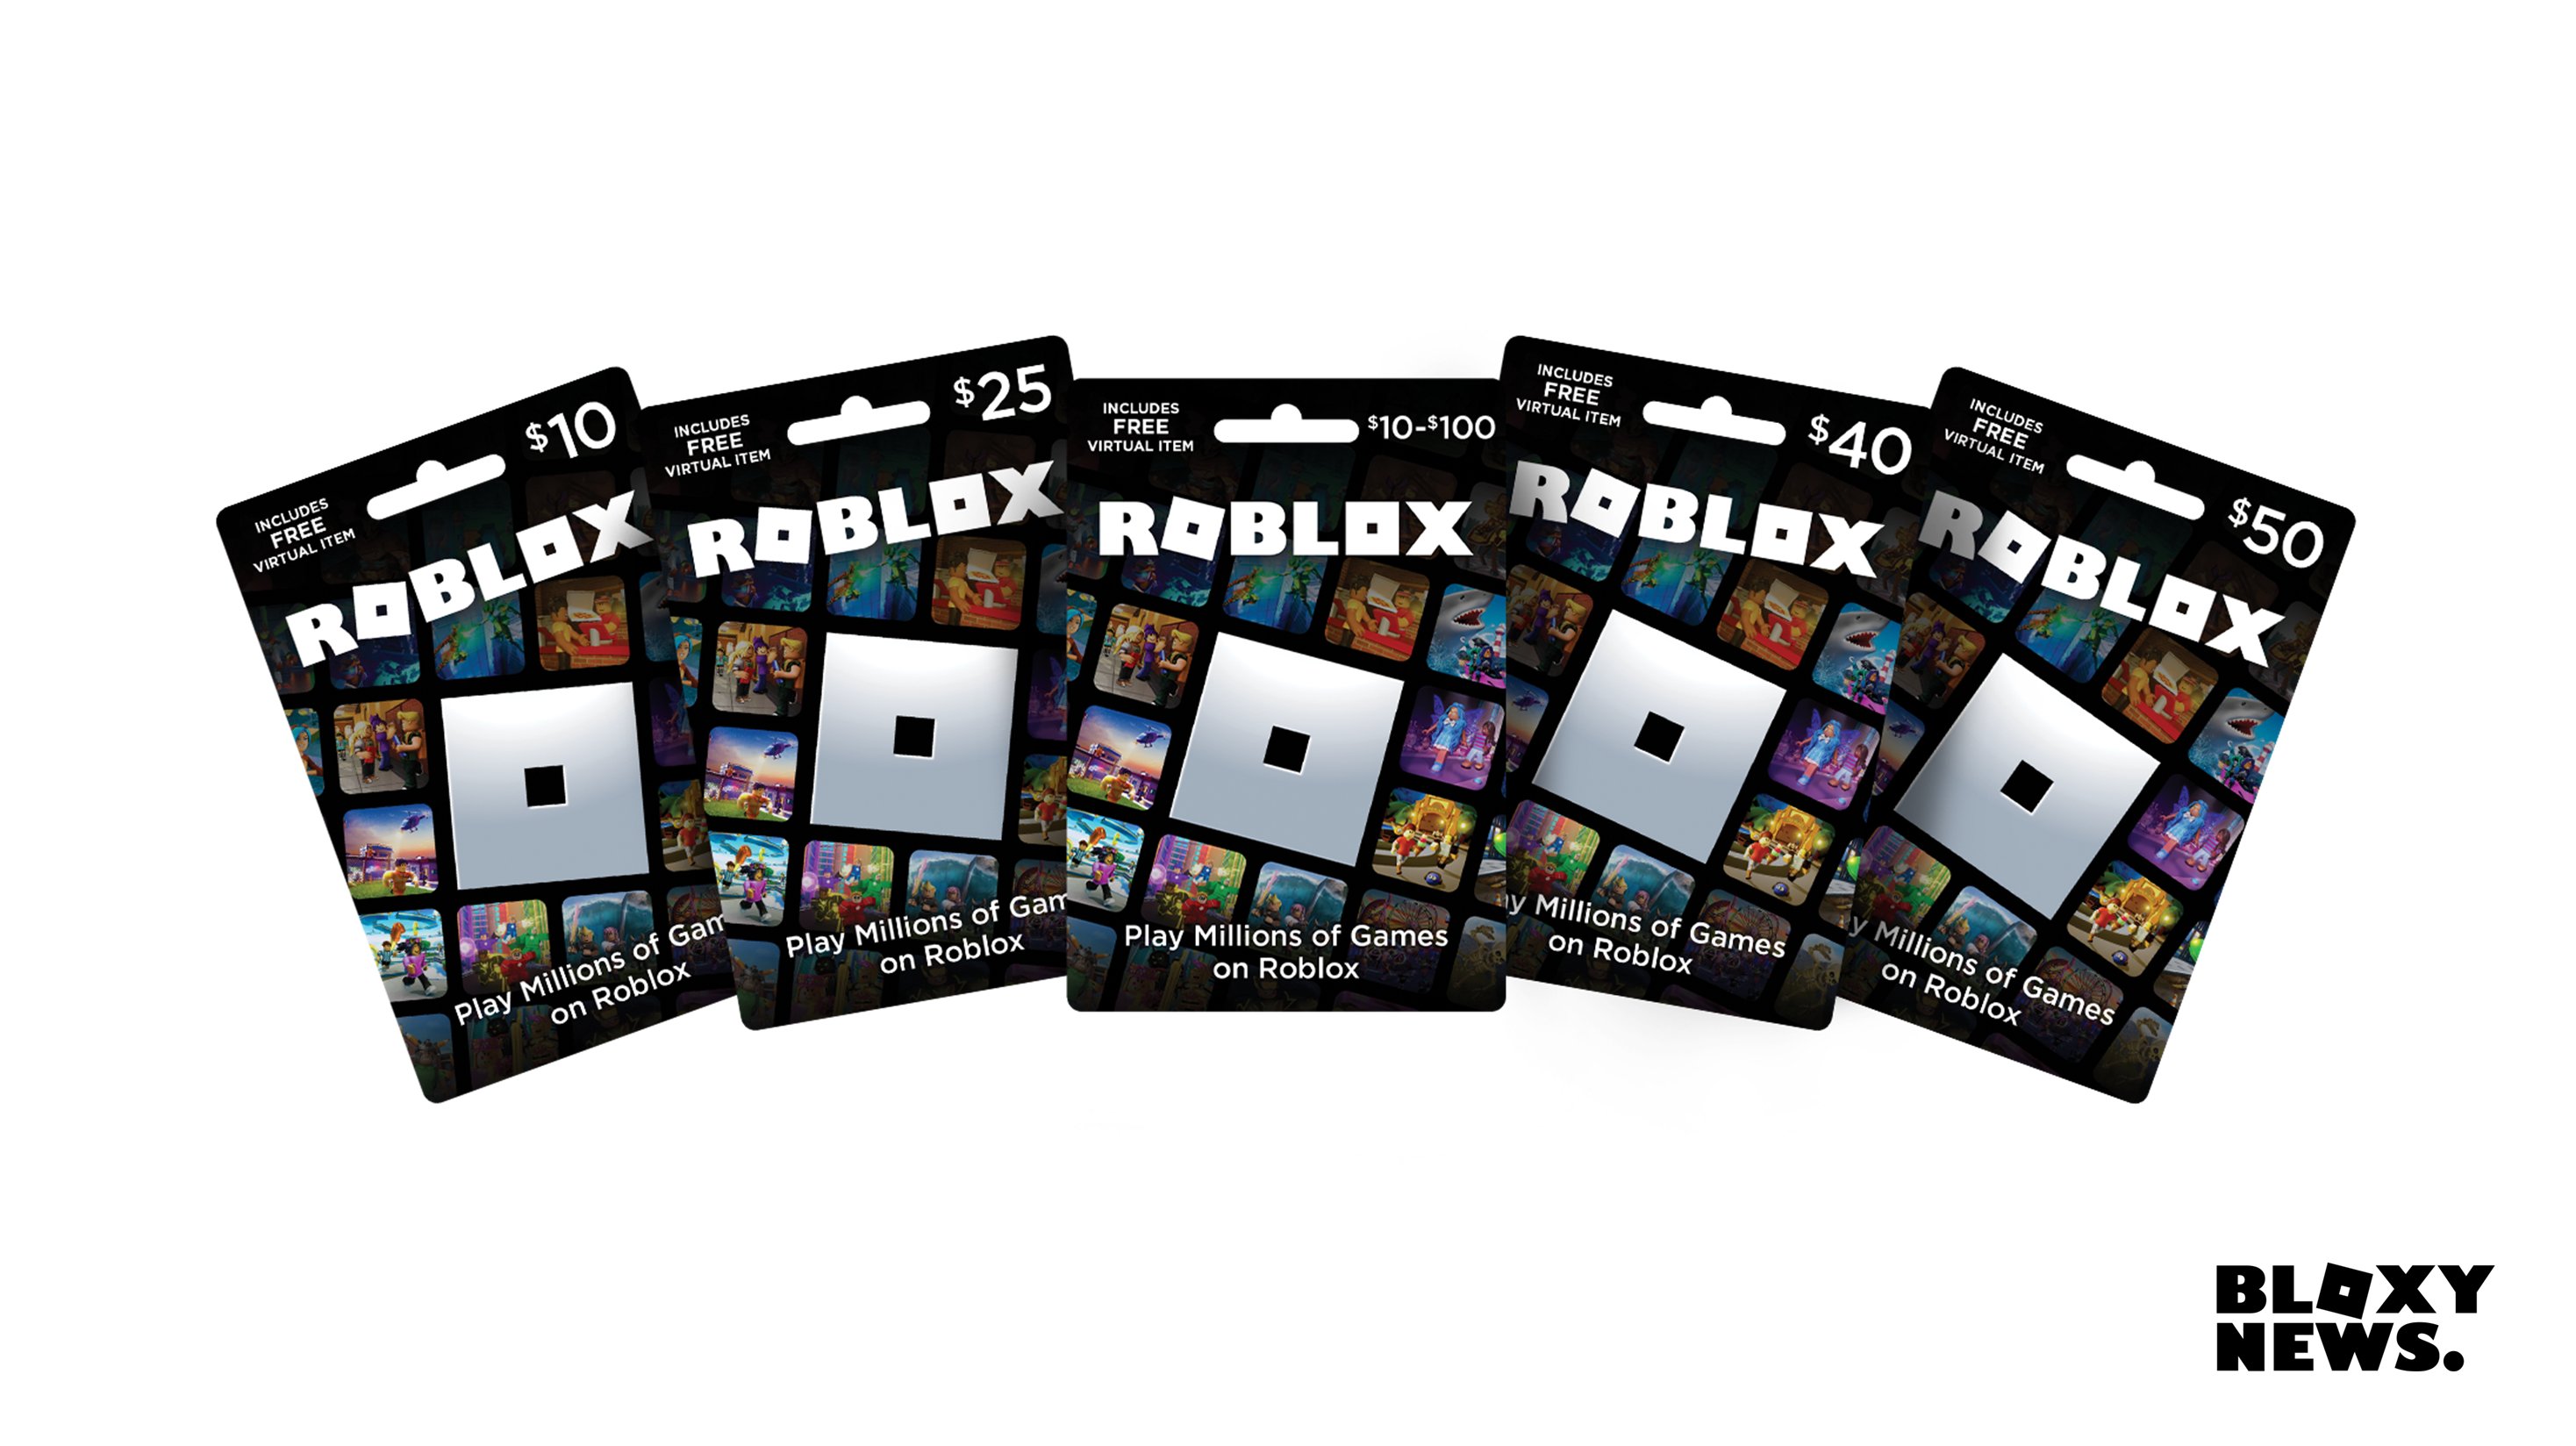 Bloxy News on X: All of the @Roblox branding you could ever need, all in  one place. Check out the newly updated Roblox Branding Assets by Bloxy News,  featuring logos, icons, key